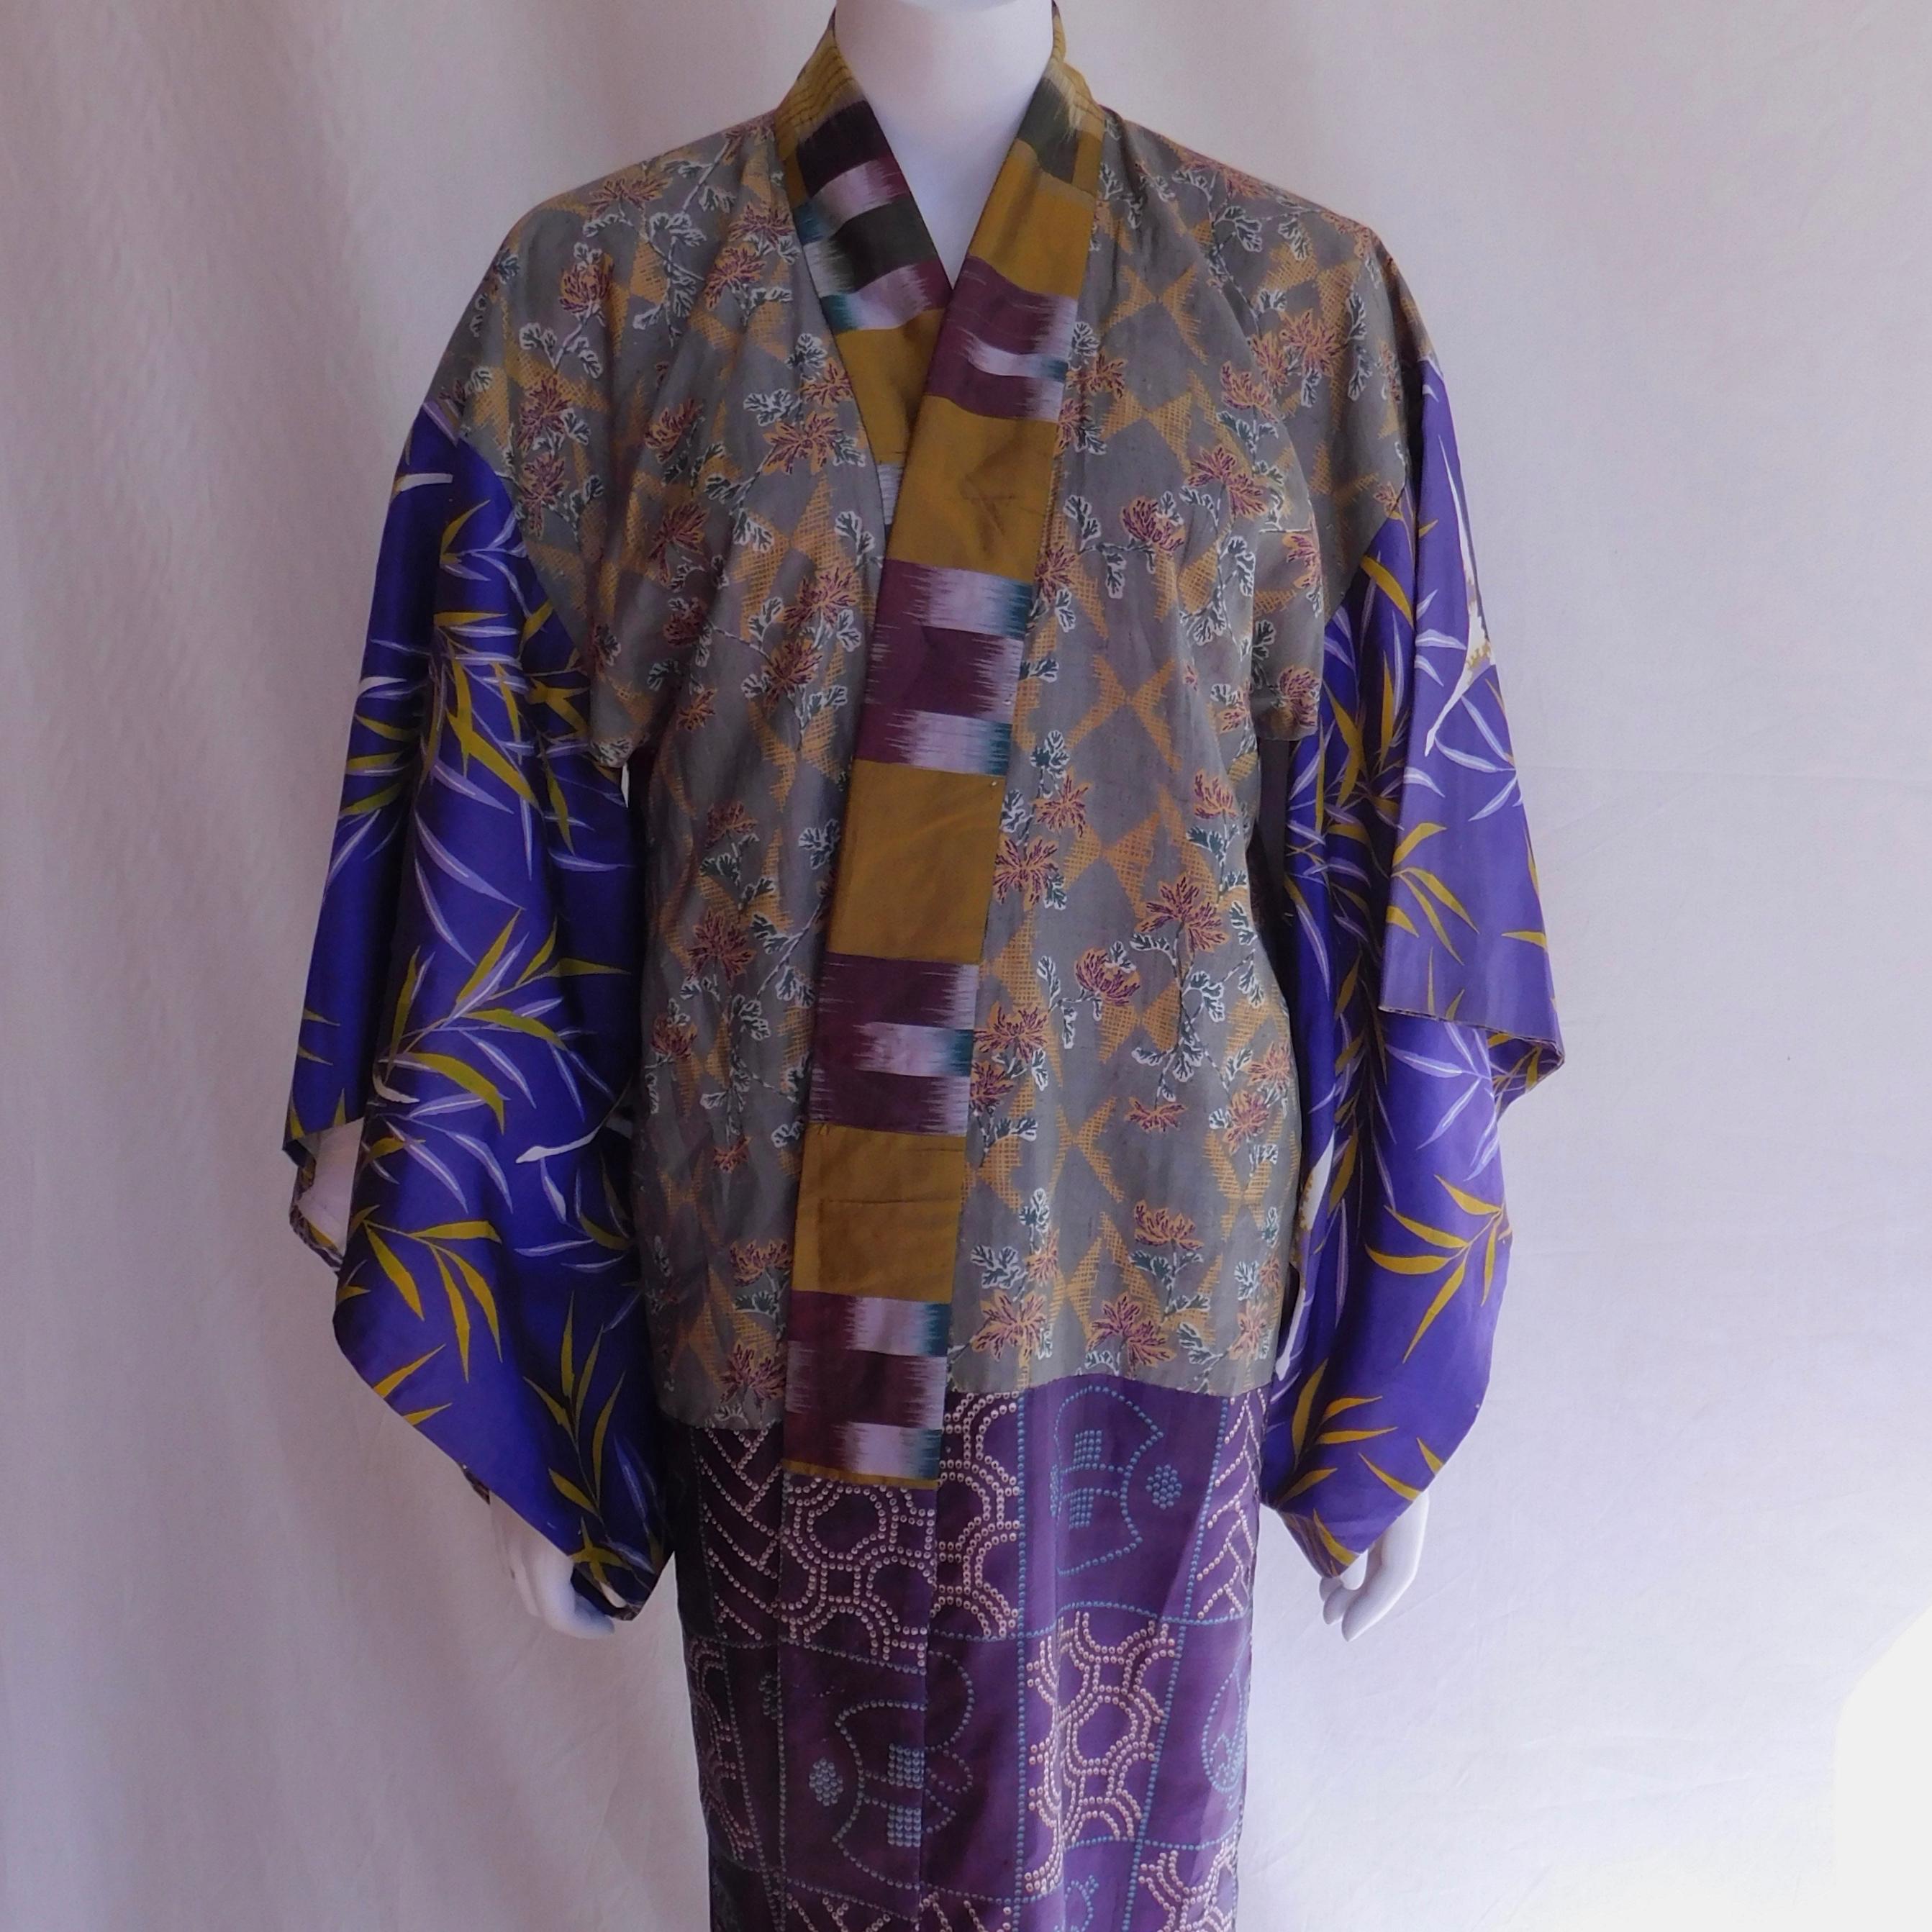 An elegant patchwork Taisho period Japanese juban kimono, circa 1920. Constructed of hand painted and block printed with a silk ikat collar. Soft woven cotton lining. In good overall condition with some wear to bottom hem.
Lovely to wear or hang on